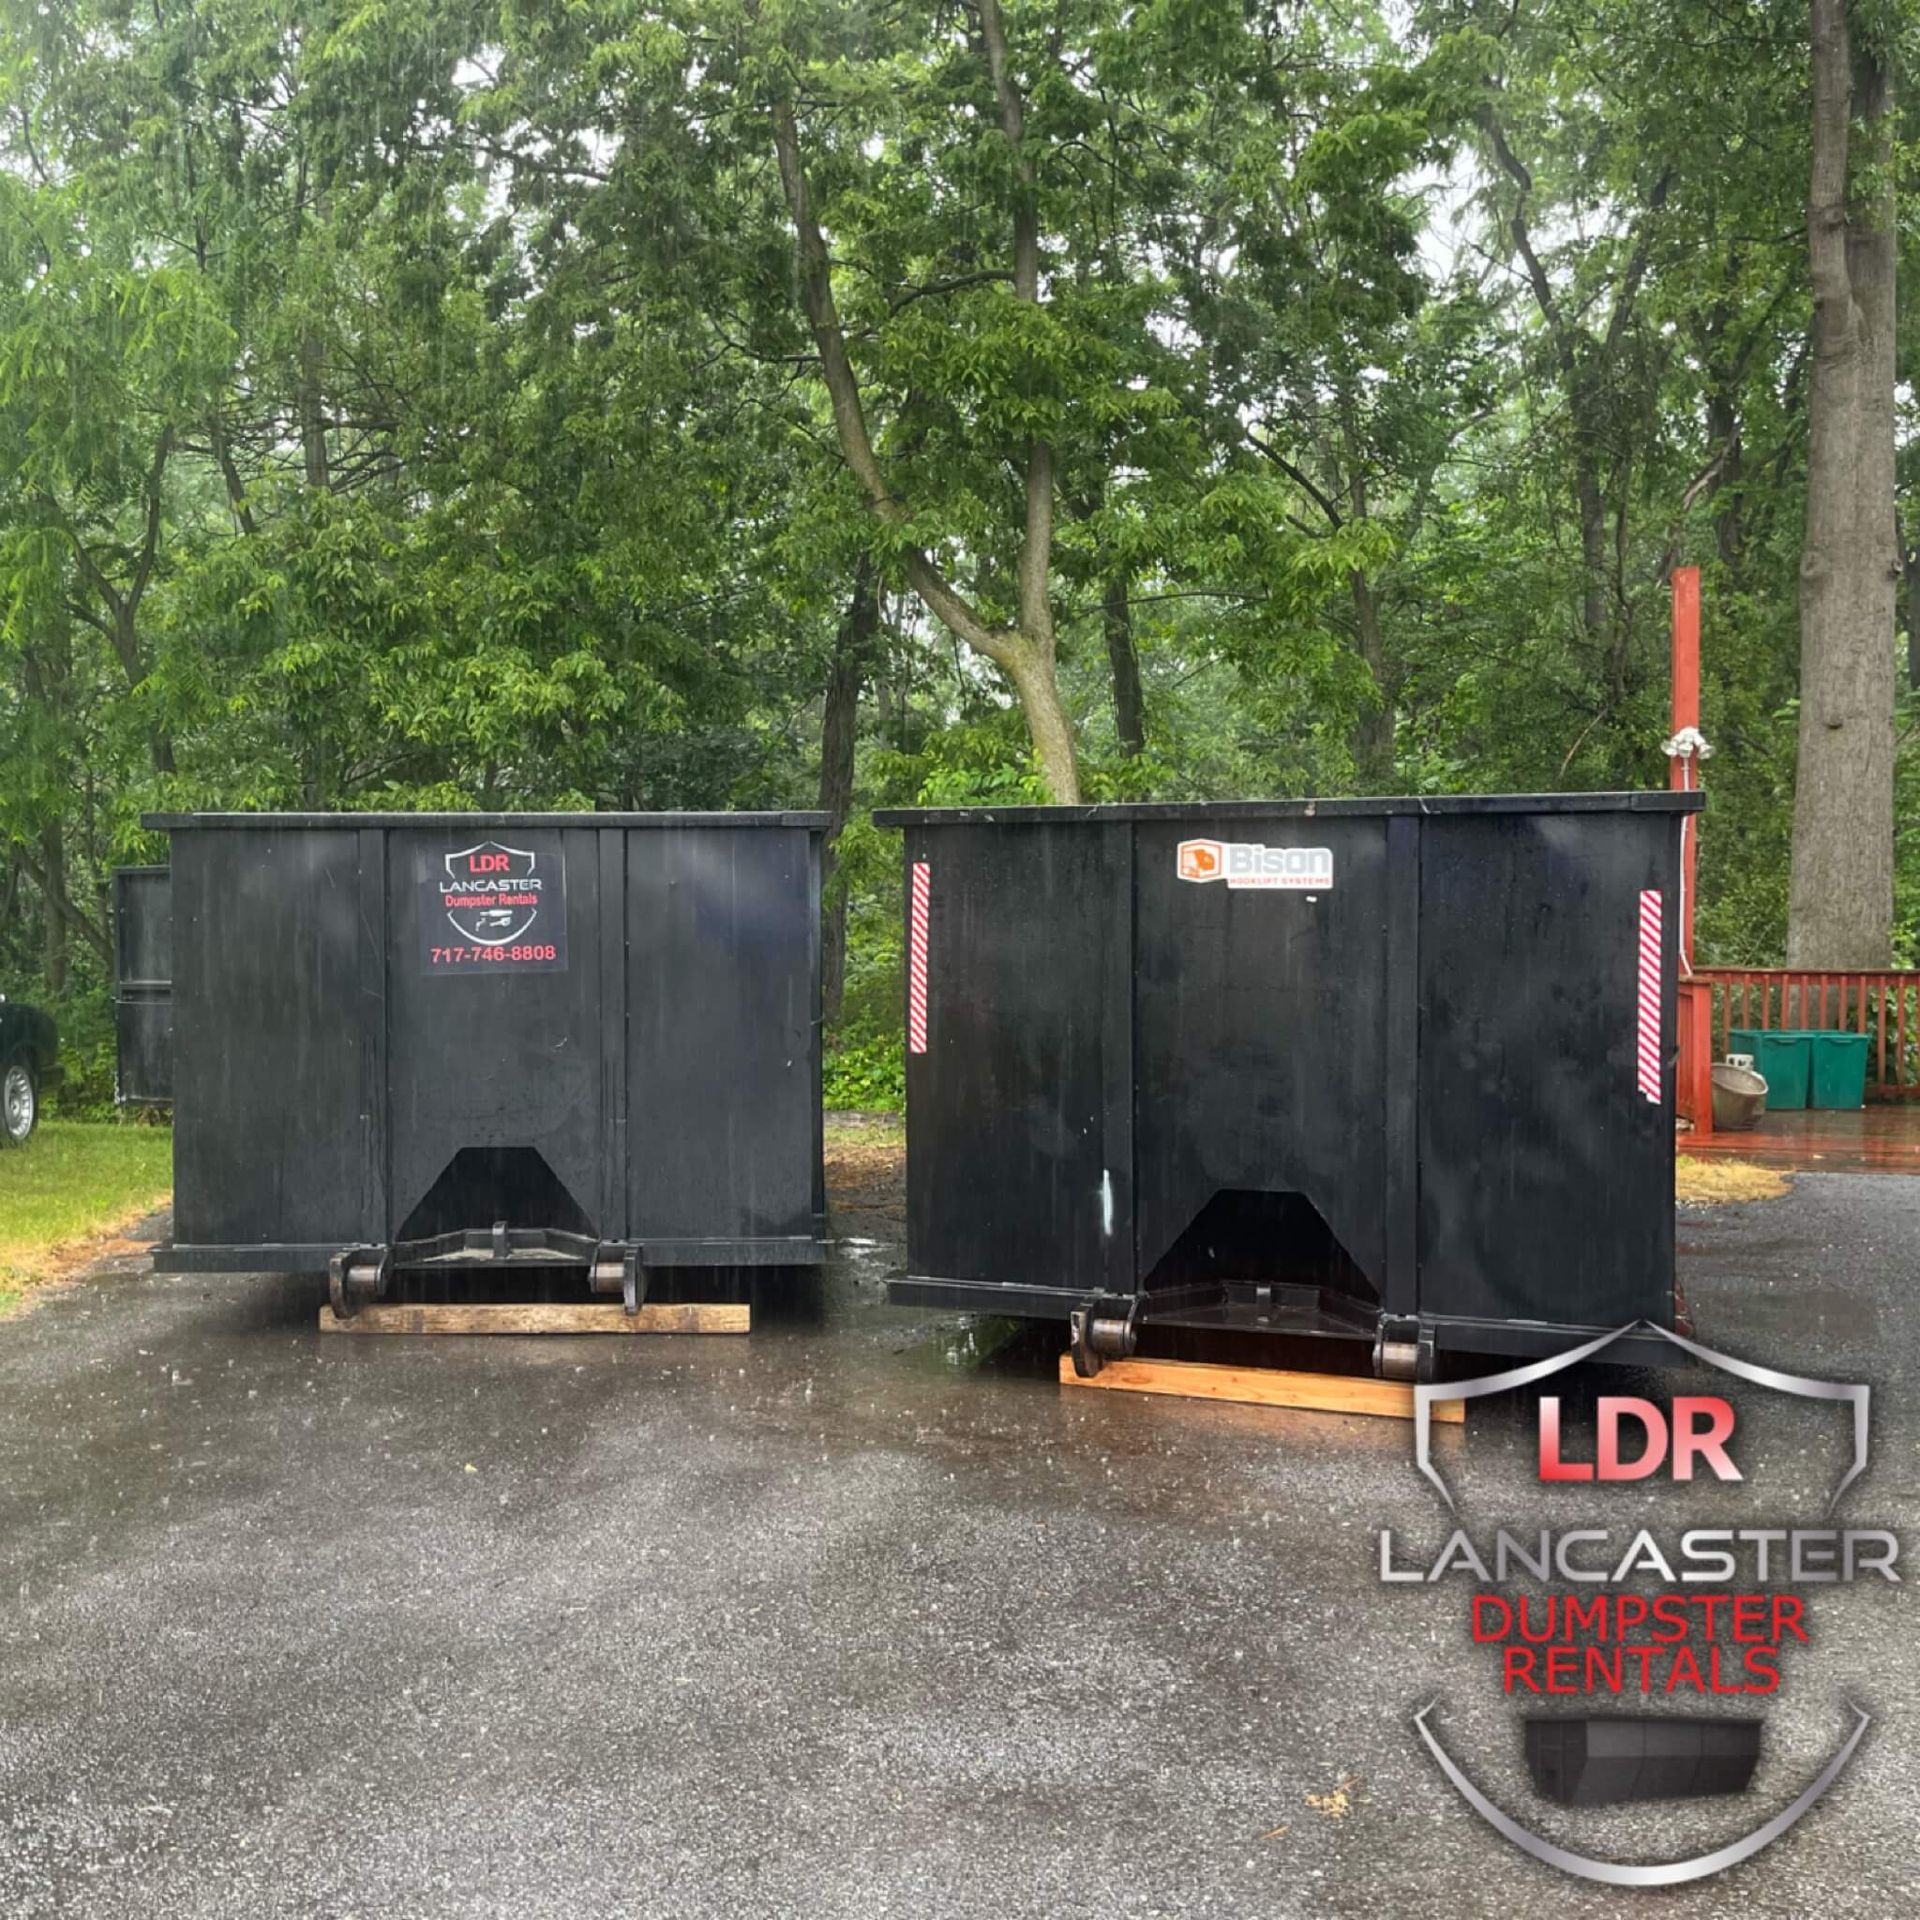 Dumpster Rental in Wrightsville Pa in front of a local business using it to clean out some junk.